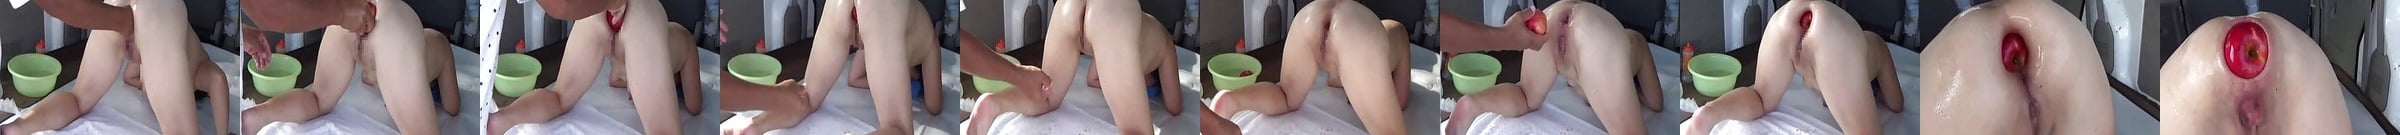 Xxxl Anal Speculum Gaping And Milk Enema Porn 1a Xhamster Pt